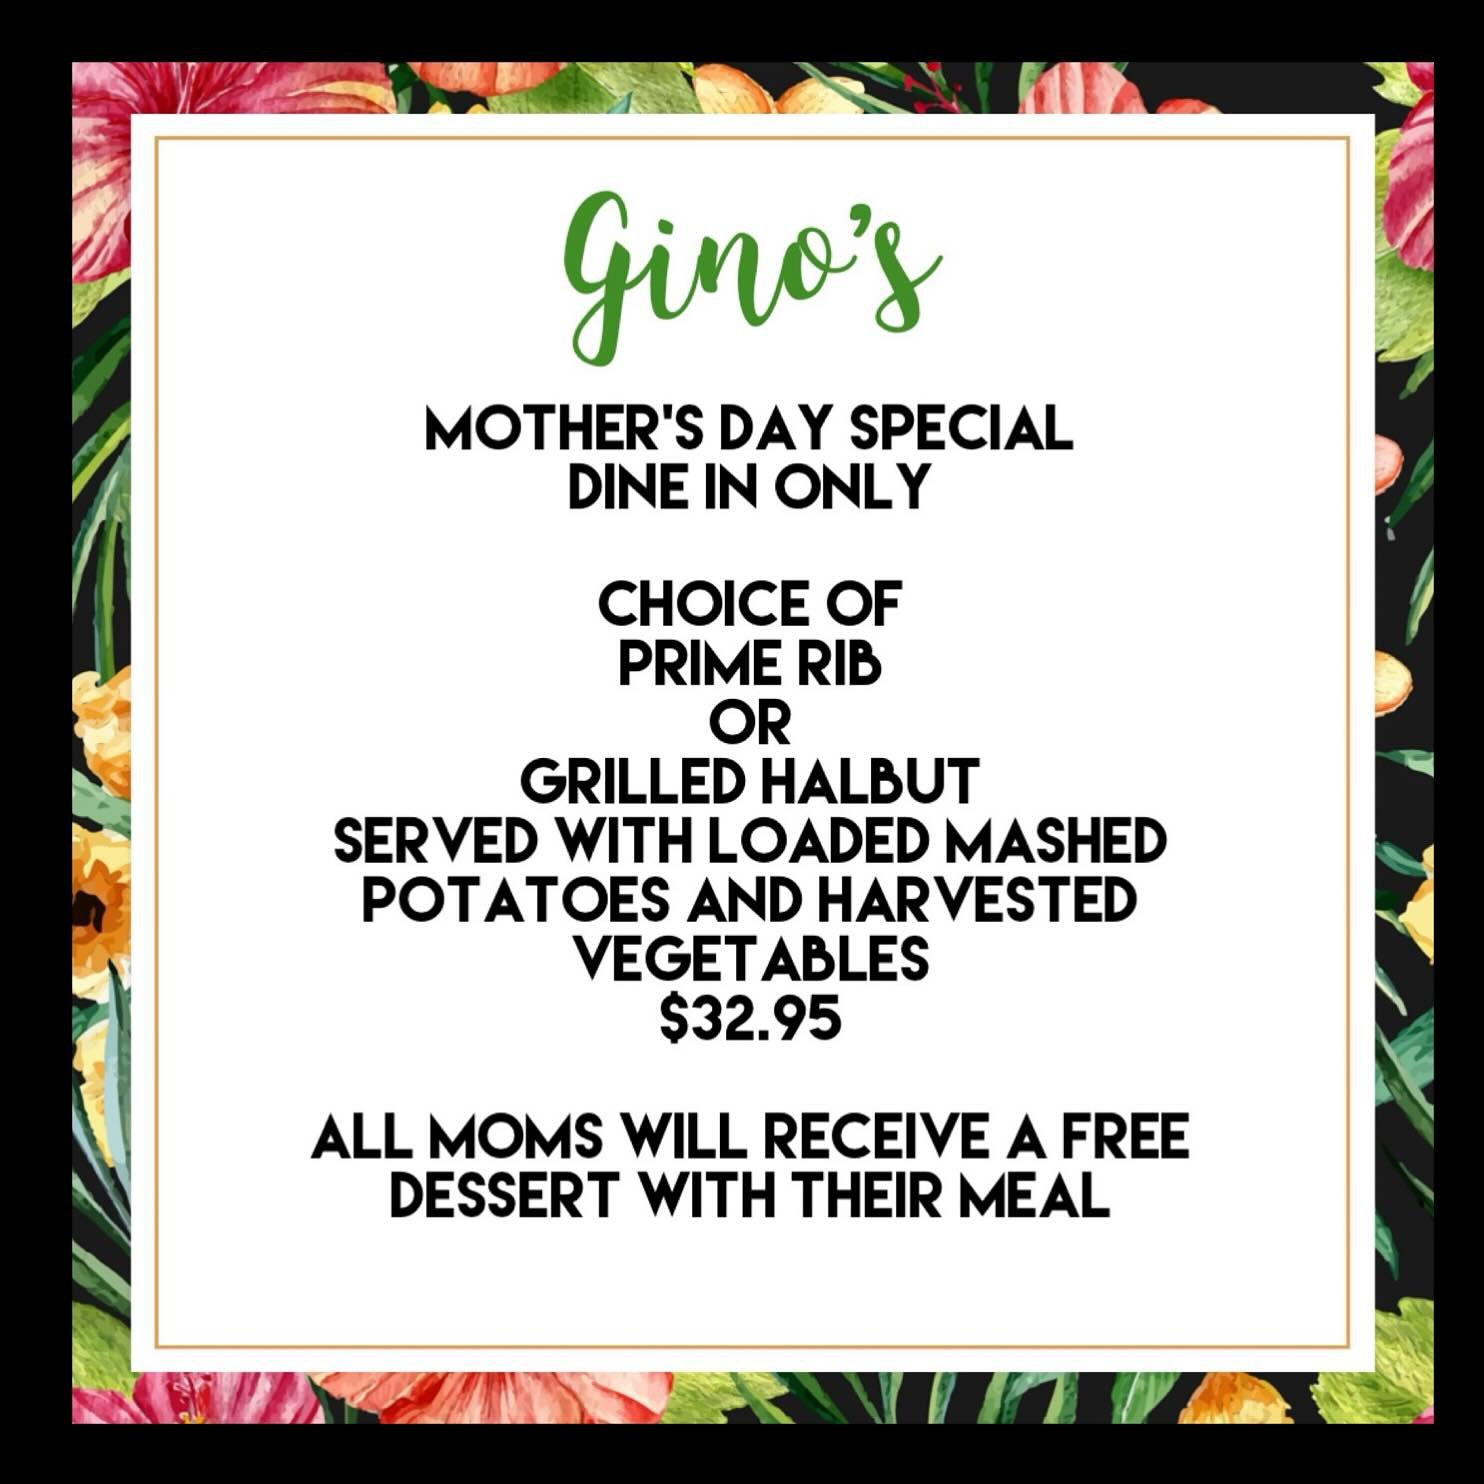 MOTHER&rsquo;S DAY AT GINO&rsquo;S!
Sunday, May 12, 2024 💐

Mother&rsquo;s Day Special 
Dine In Only

Choice of
Prime Rib
Or
Grilled Halbut
Served with loaded mashed potatoes and harvested vegetables 
$32.95 

All moms will receive a free dessert wi